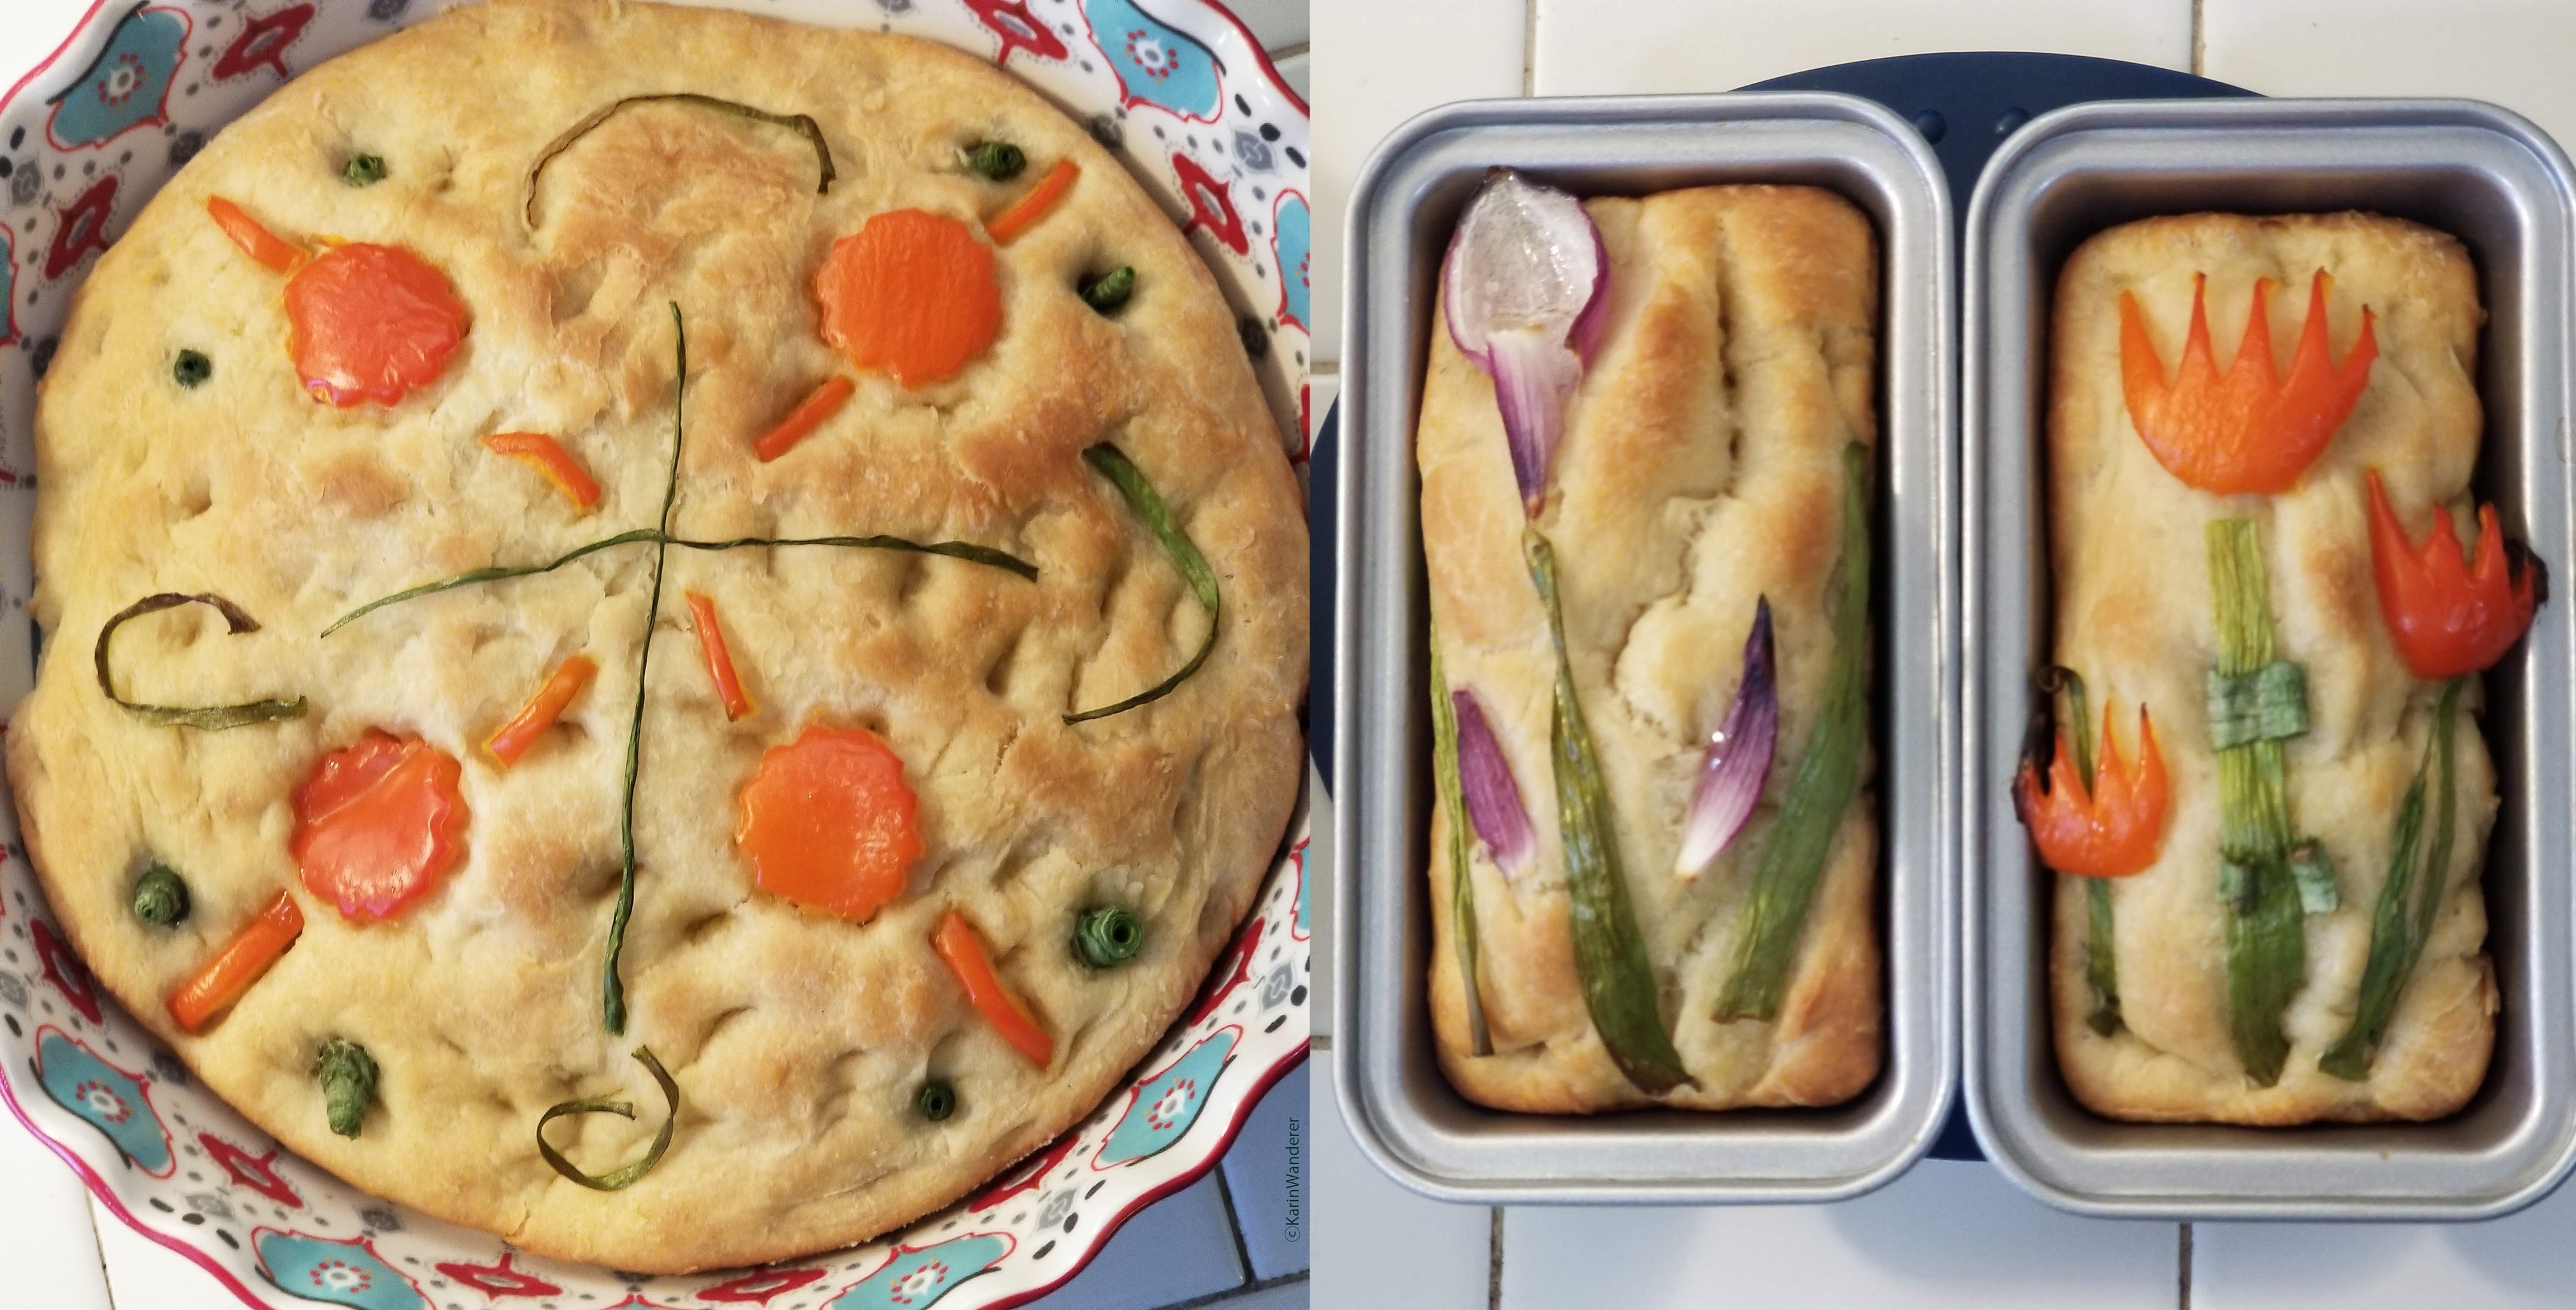 Photo of 3 loaves of focaccia, baked to golden brown. Loaf 1: circular loaf with a simple mandala made from green onions & red peppers. Loaf 2: small rectangular loaf using red & green onions to look like irises. Loaf 3 : small rectangular loaf using red peppers & green onions to look like tulips.